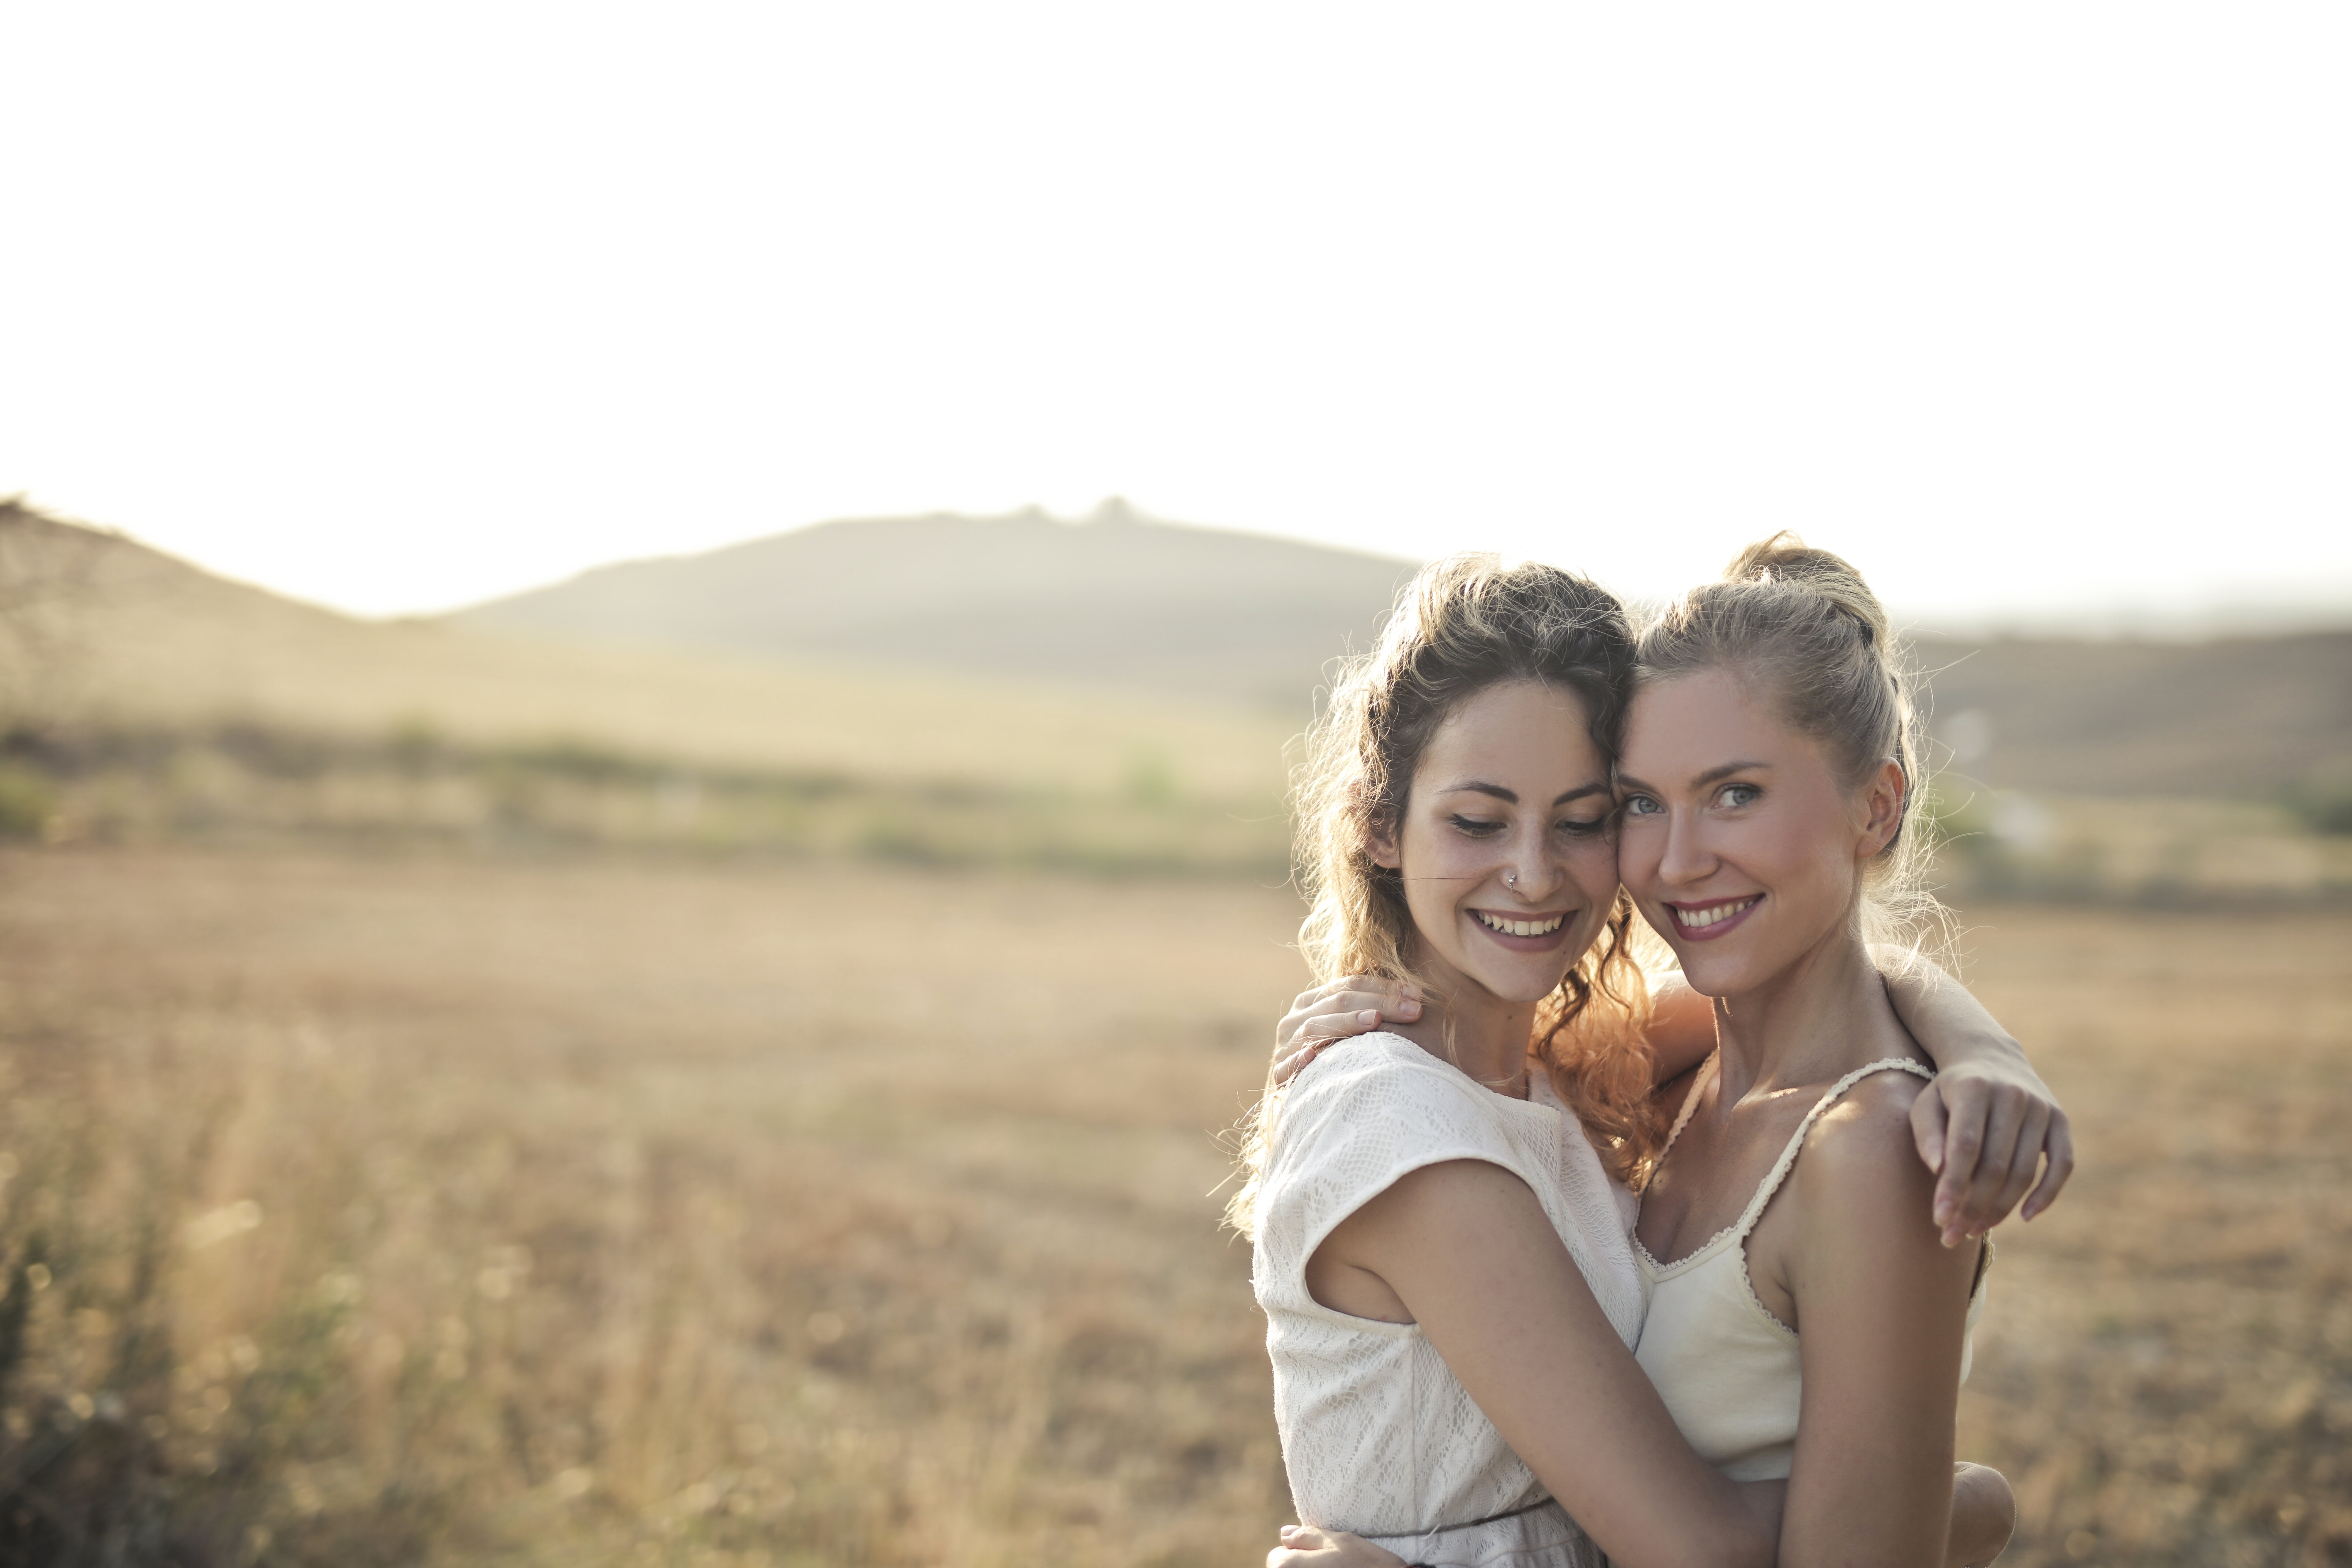 People 7680x5120 women two women outdoors smiling hugging white clothing field model brunette blonde nose ring women outdoors